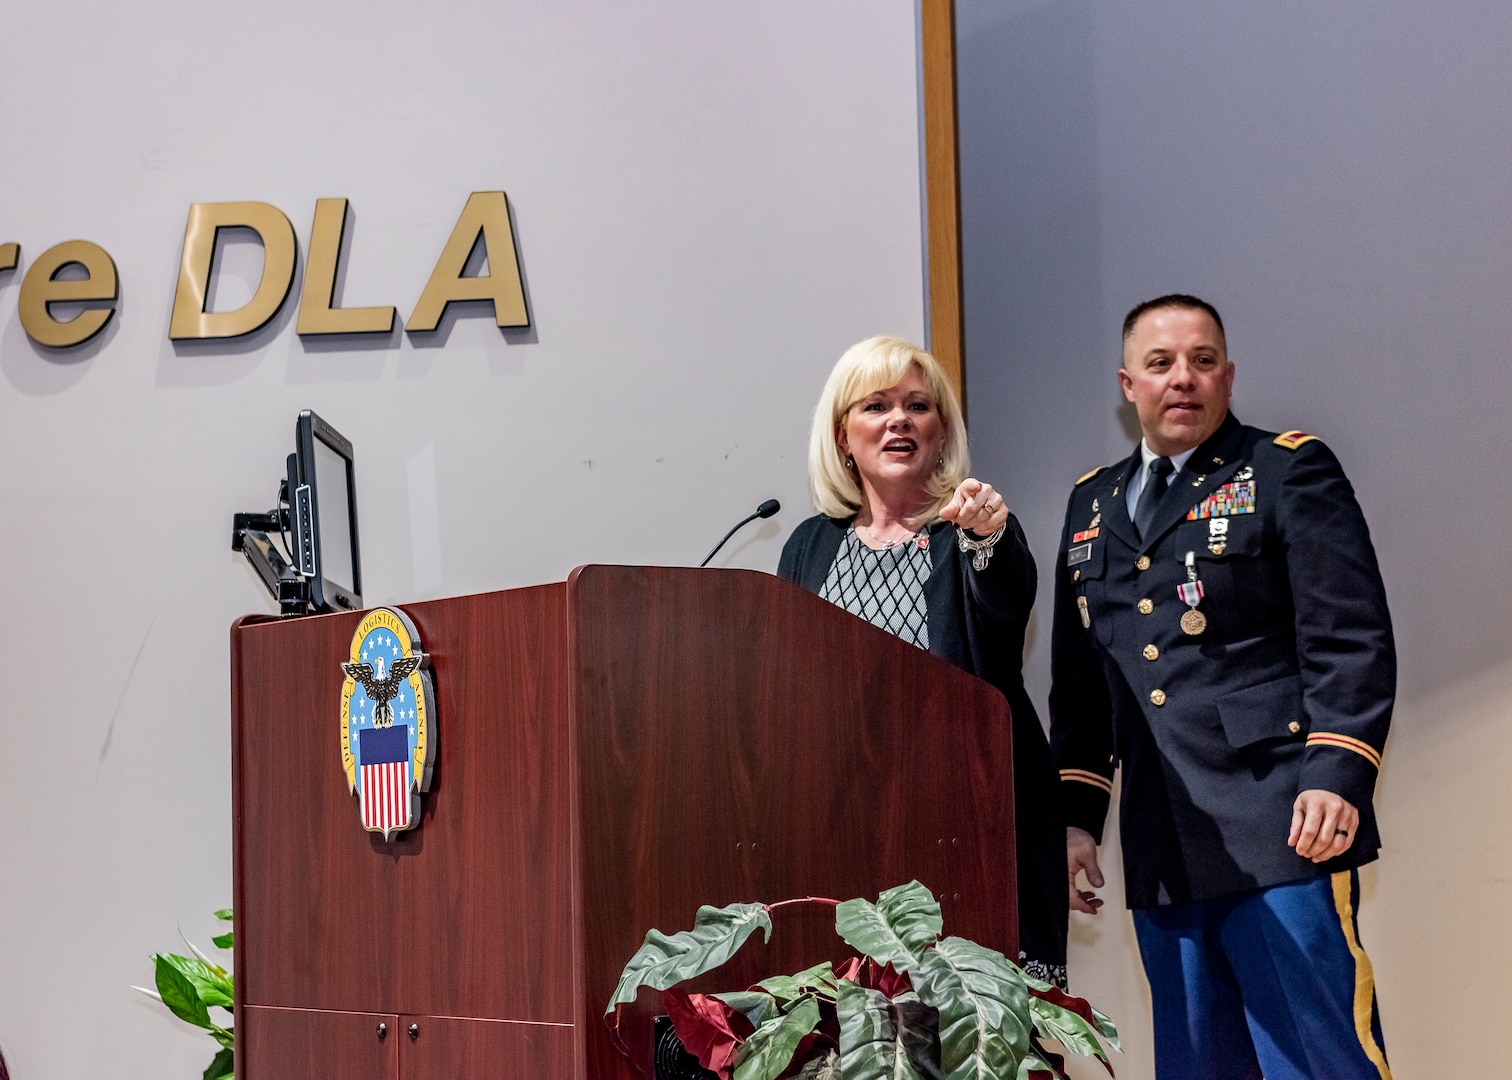 A woman points across the stage standing next to a military man, both behind a podium